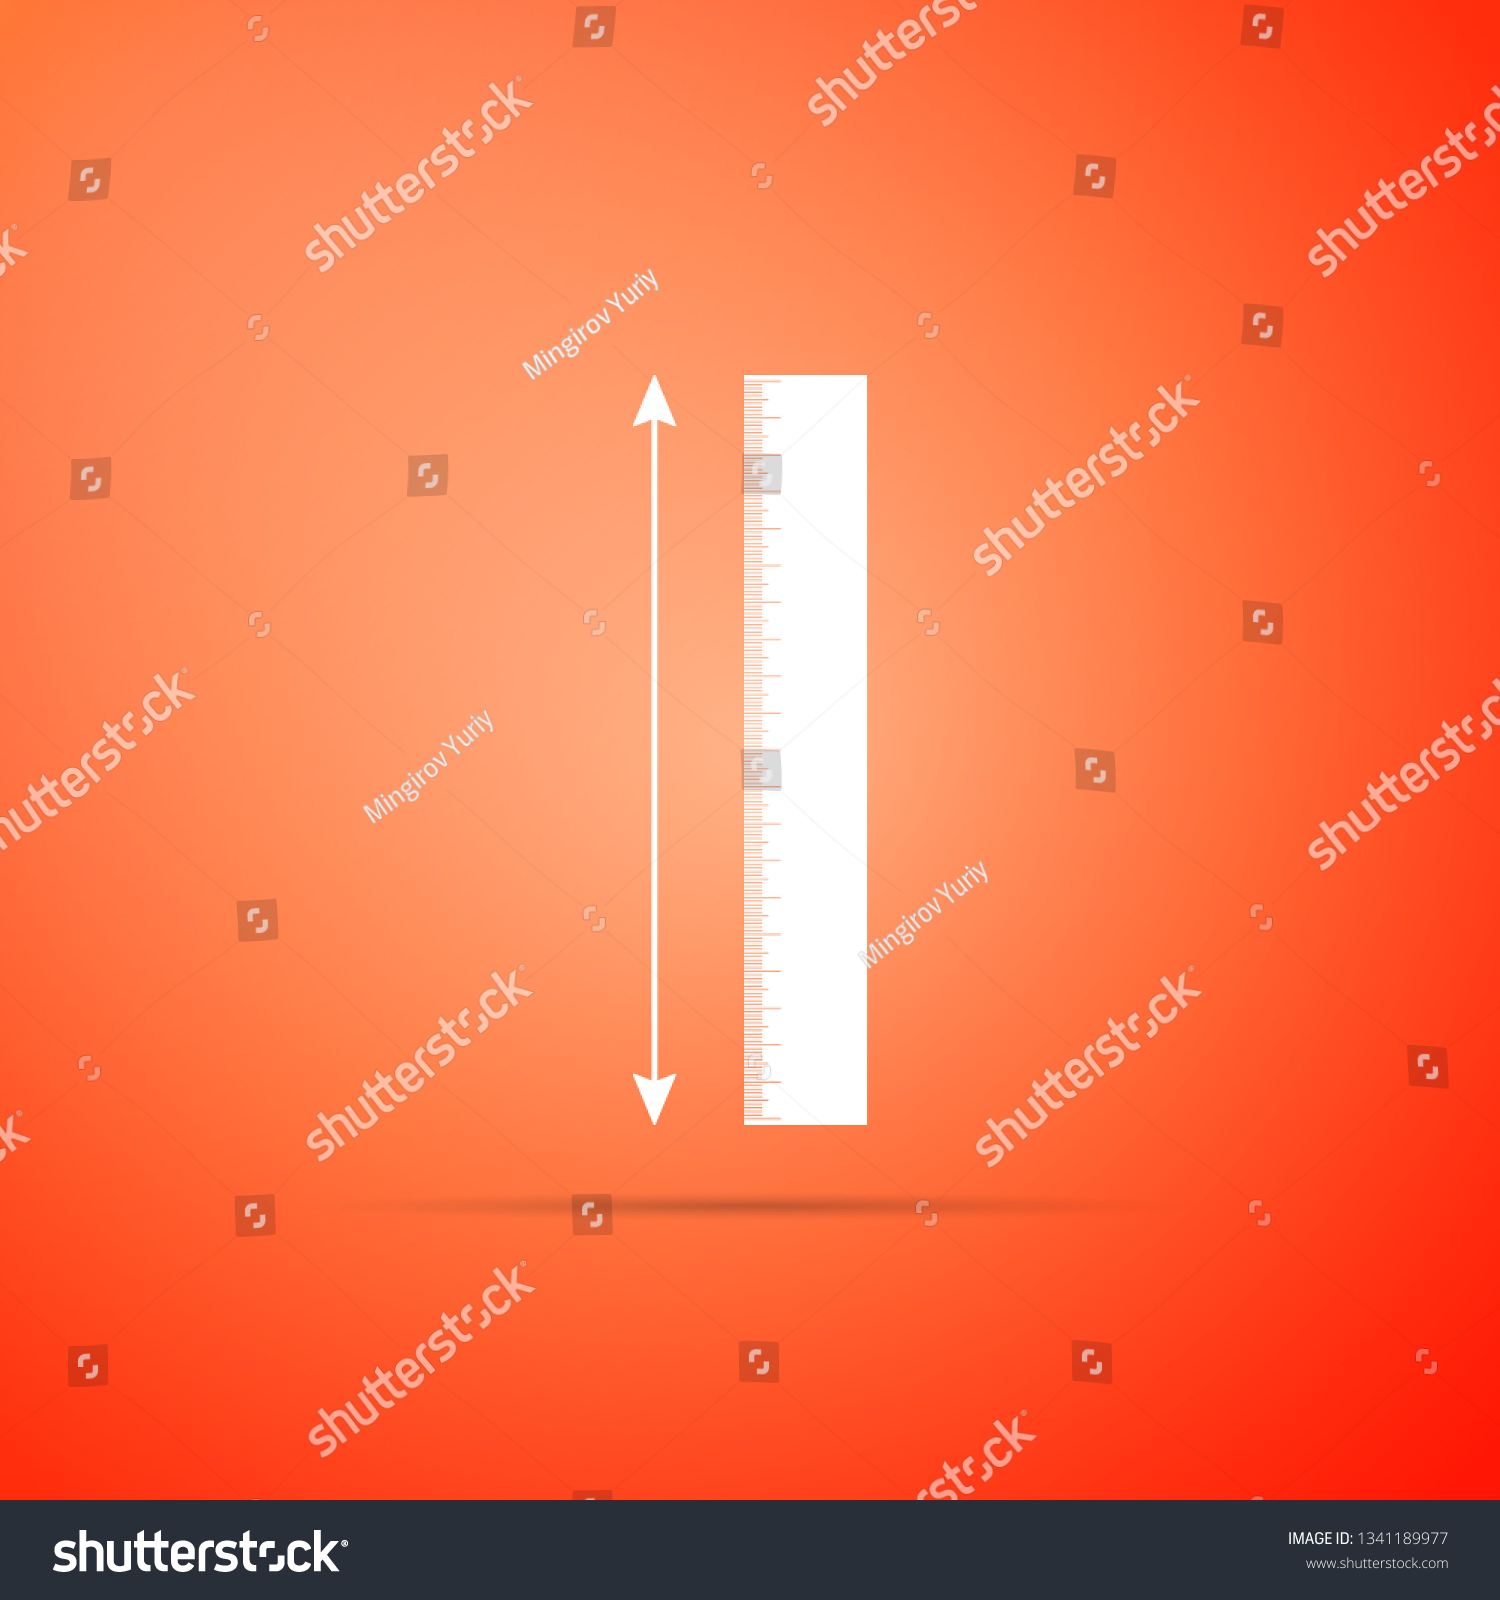 The measuring height and length icon isolated on orange background. Ruler, straightedge, scale symbol. Flat design. Vector Illustration #1341189977